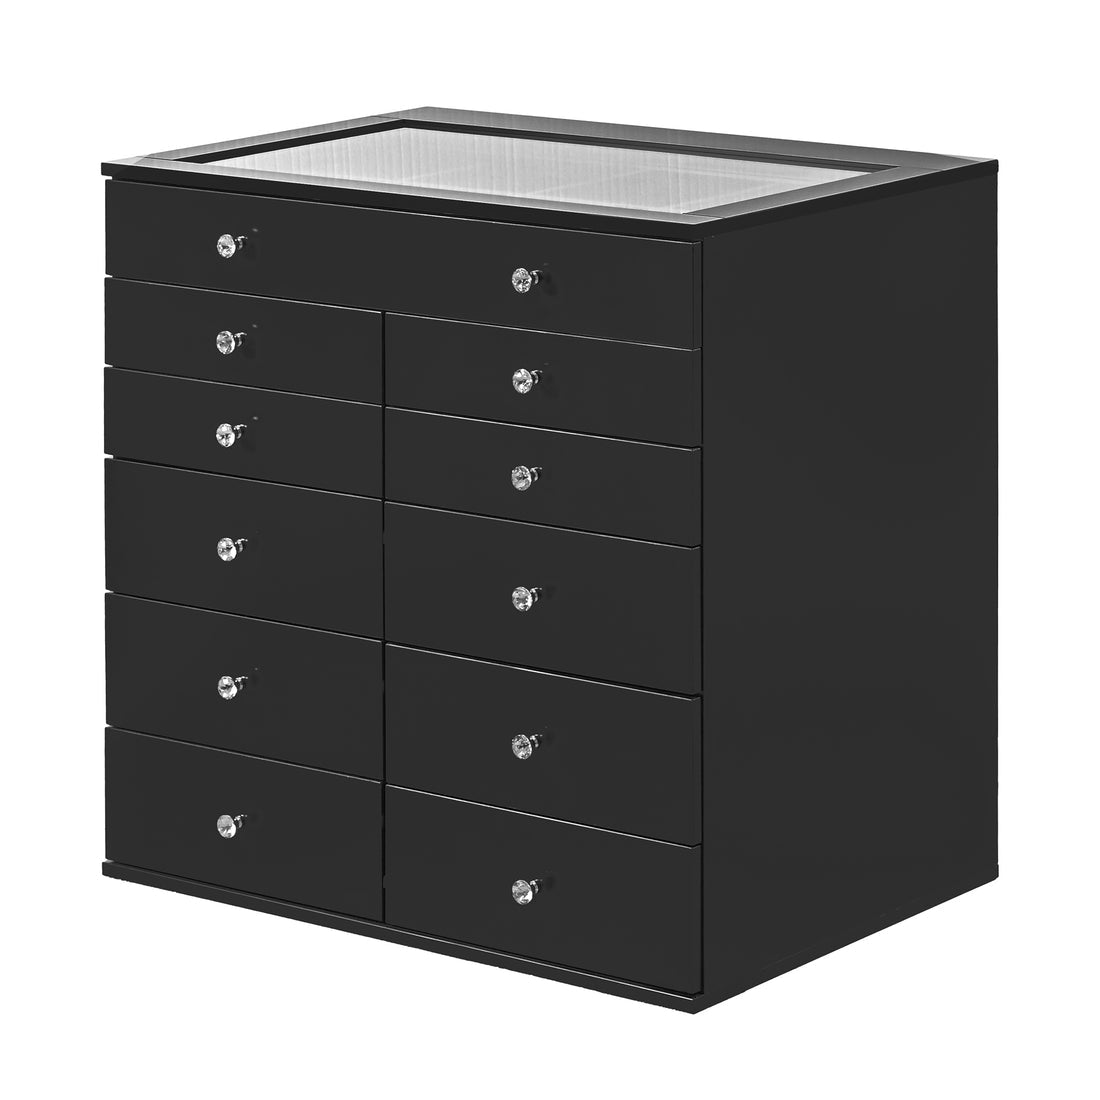 SlayStation Black Display Chest with Drawers